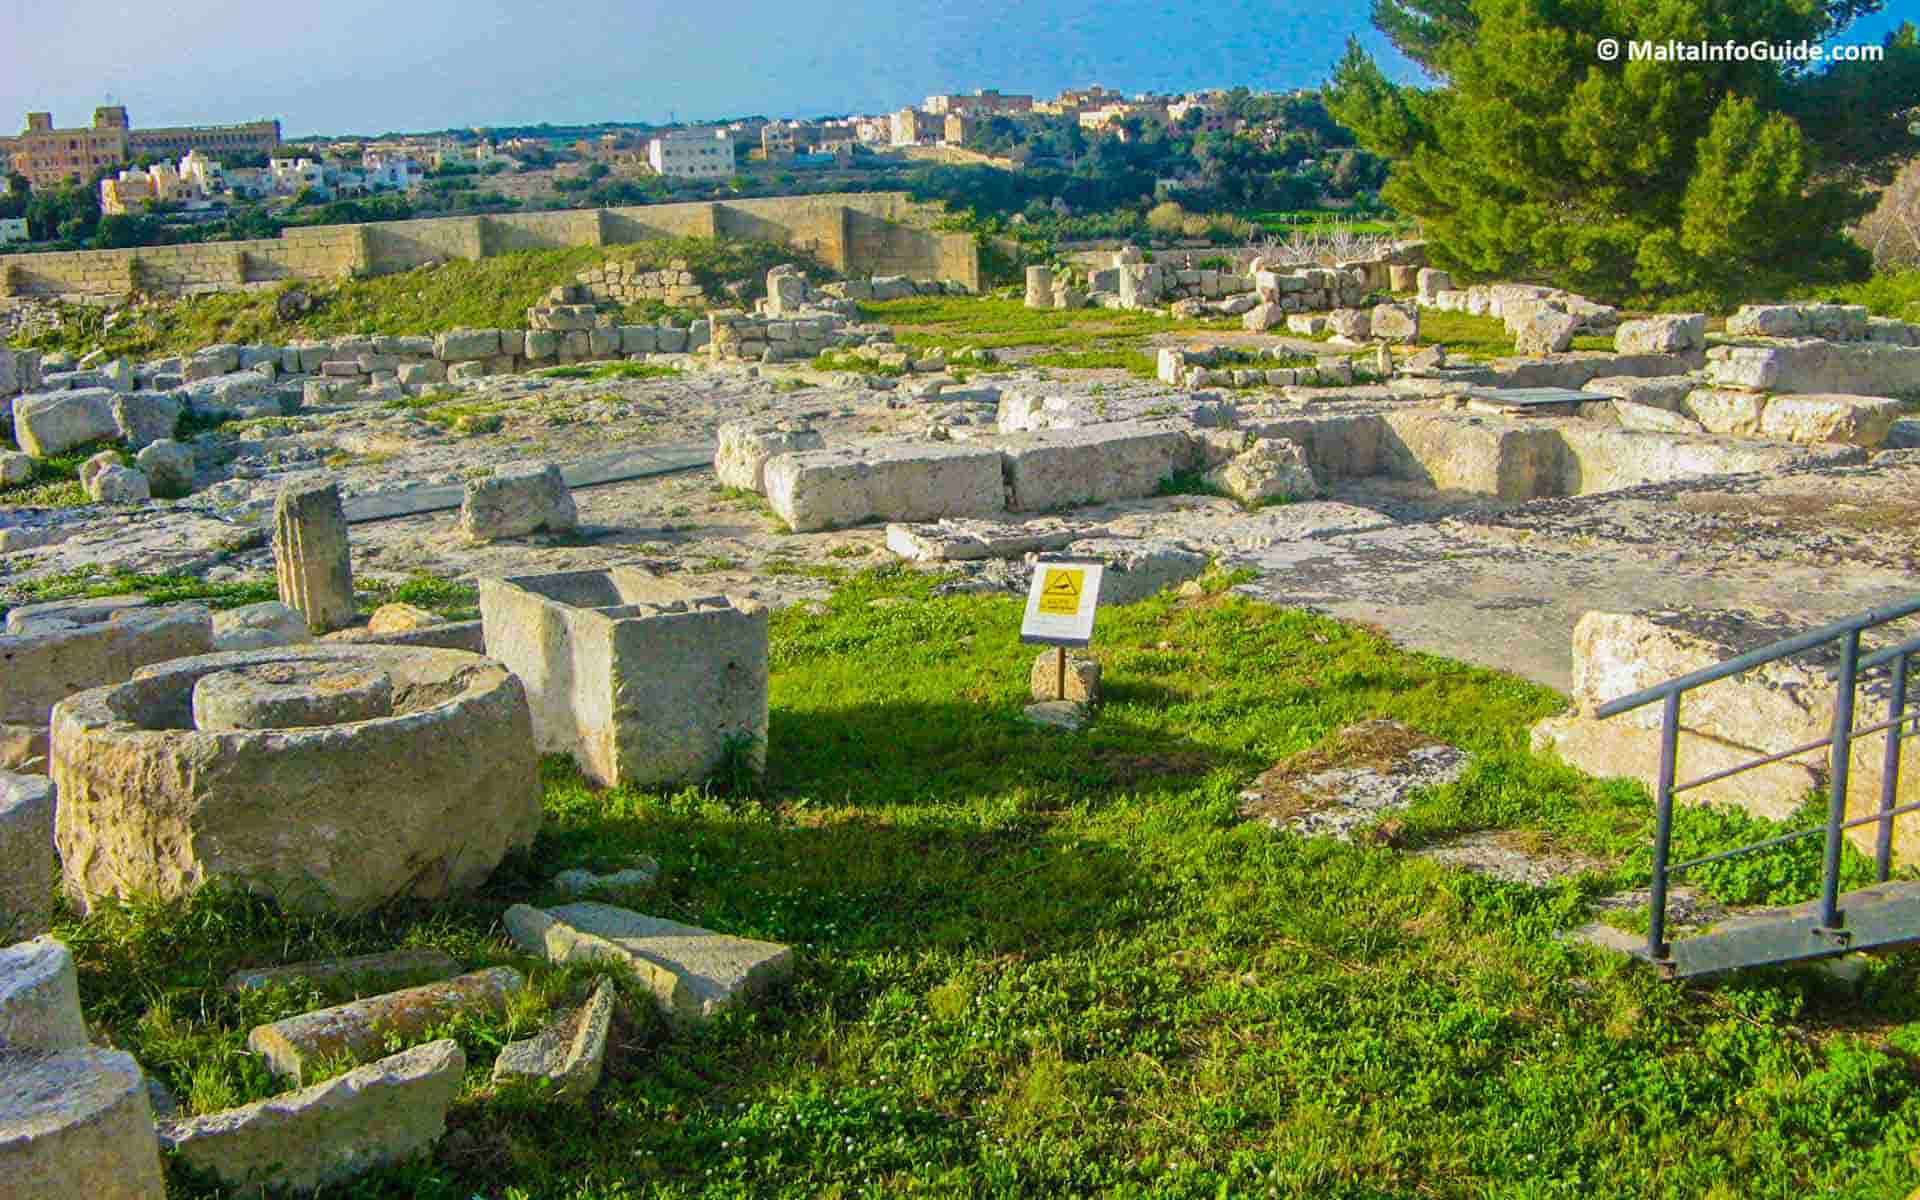 The tombstones located at the back of the Rabat roman villa.